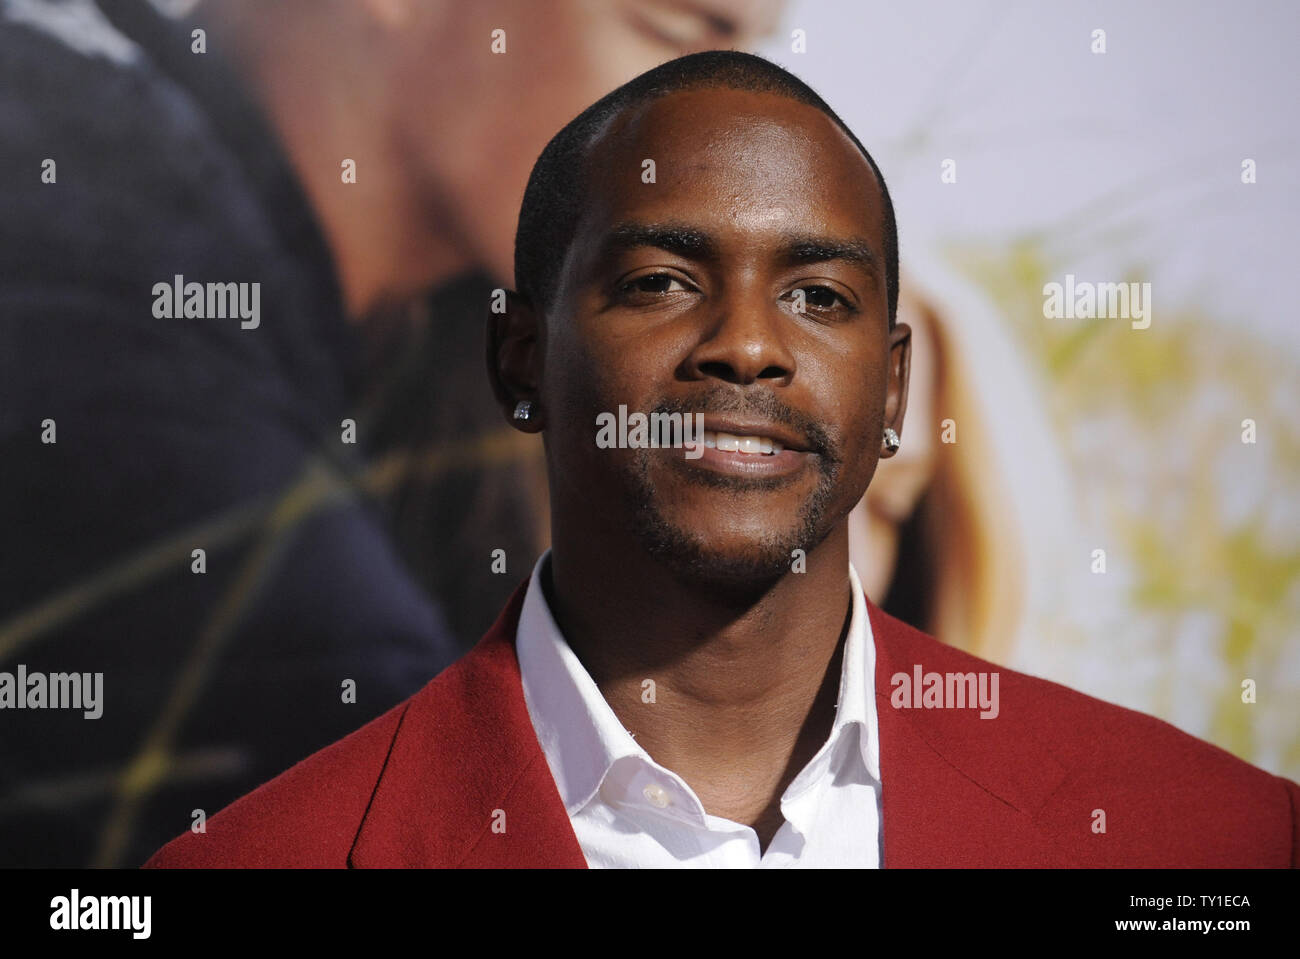 Cast member Keith Robinson attends the premiere of the film 